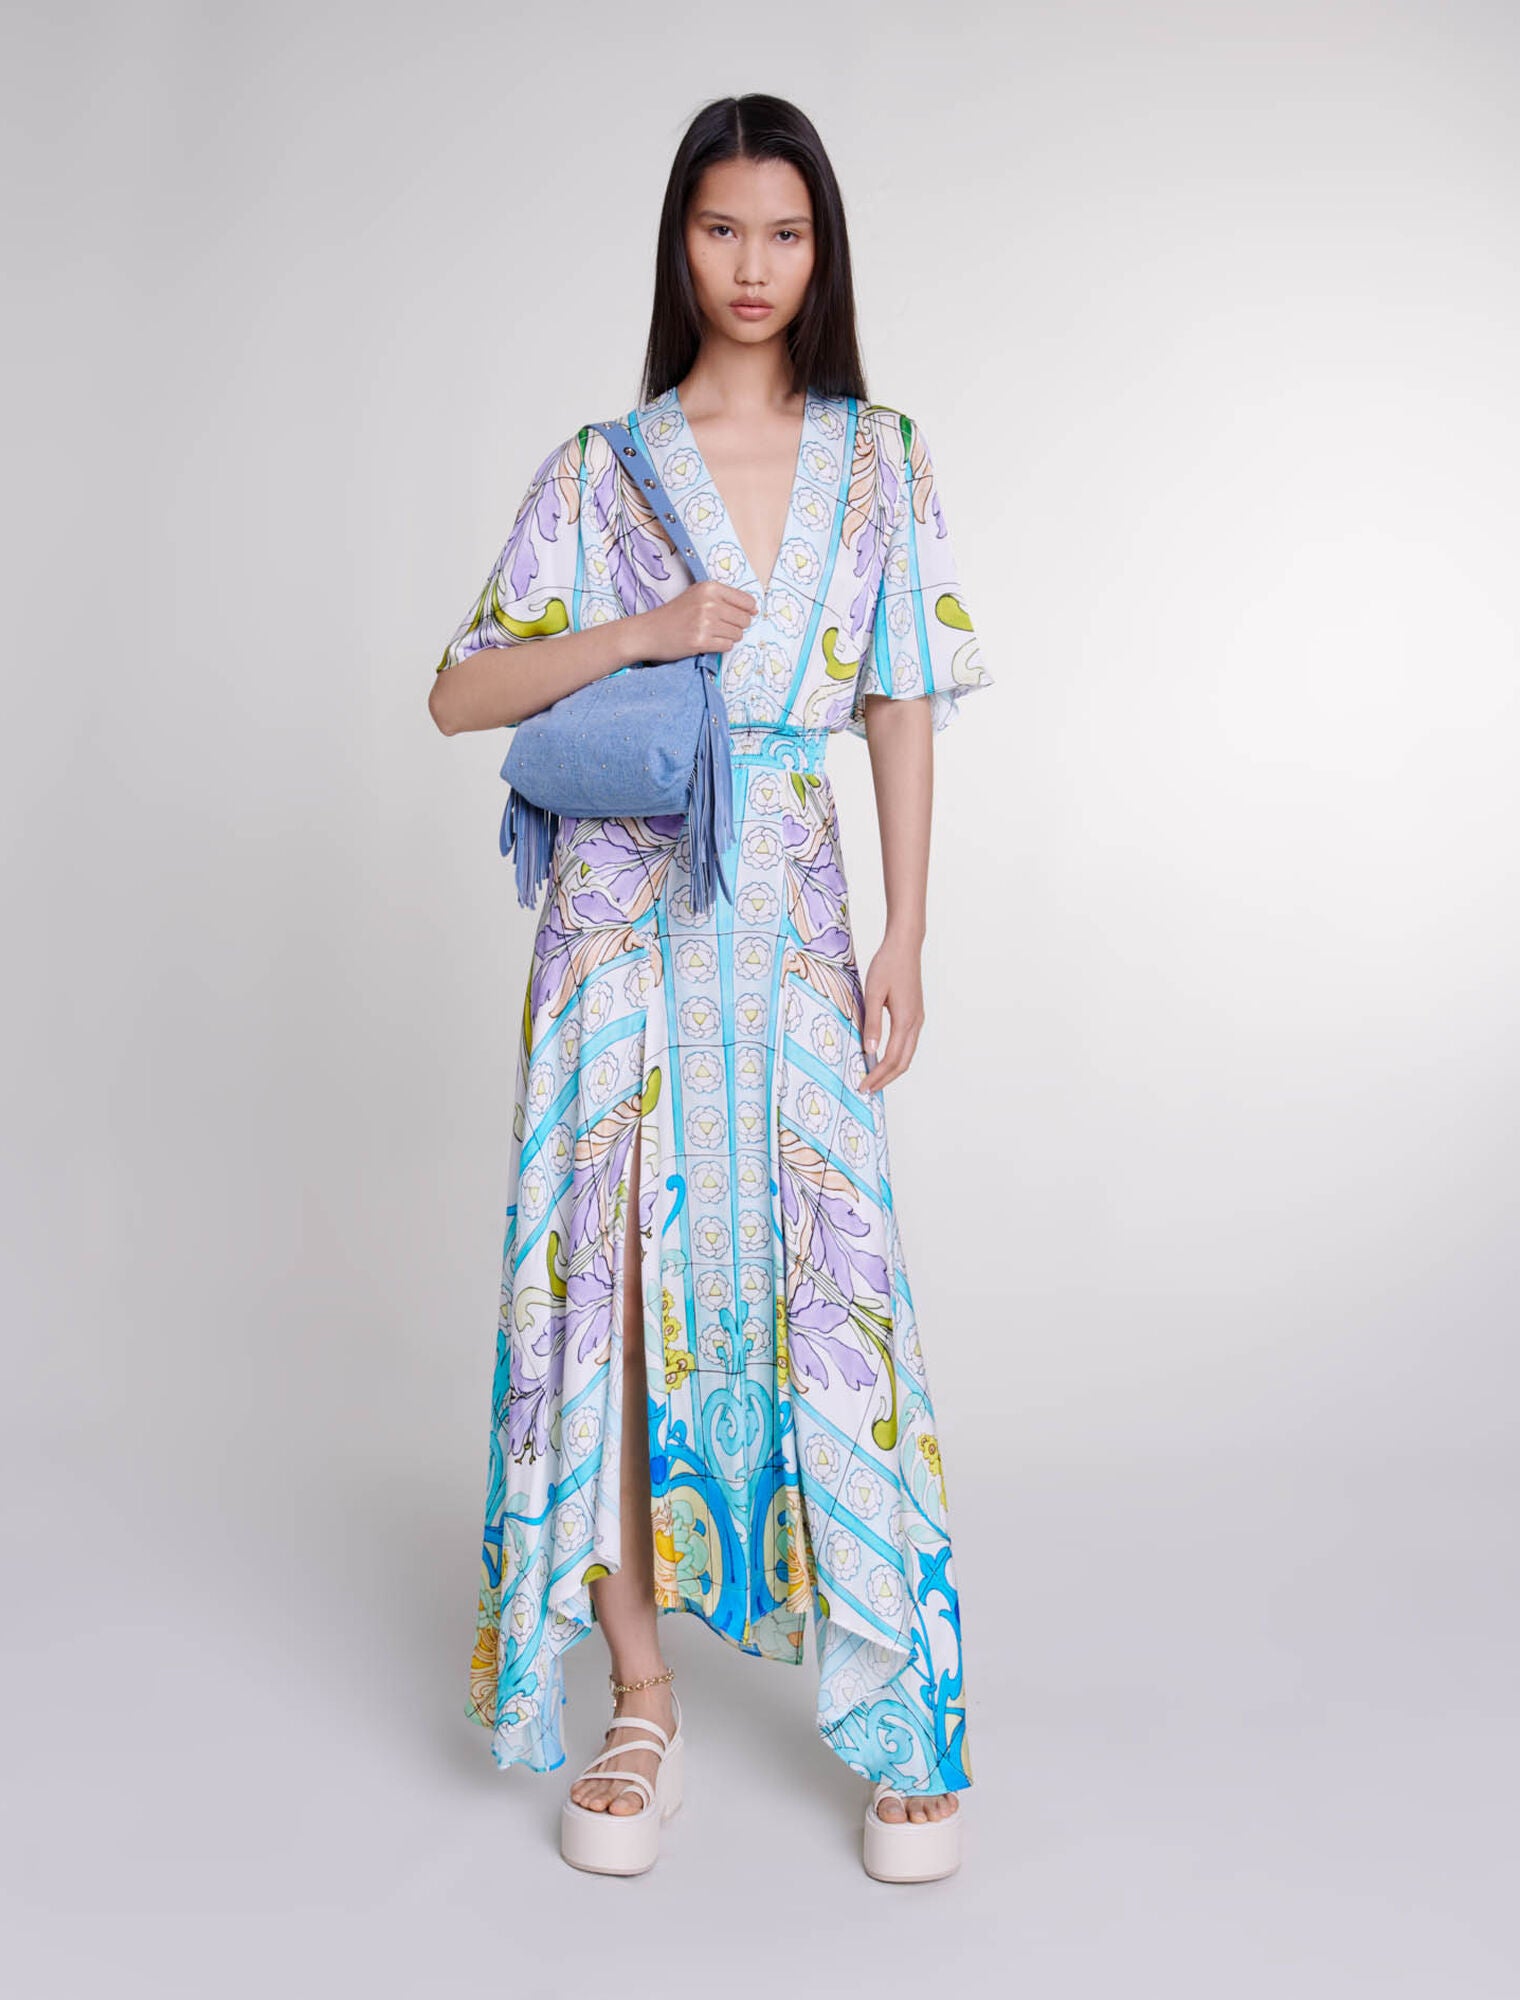 Print Mozaic-featured-Satin-look patterned maxi dress